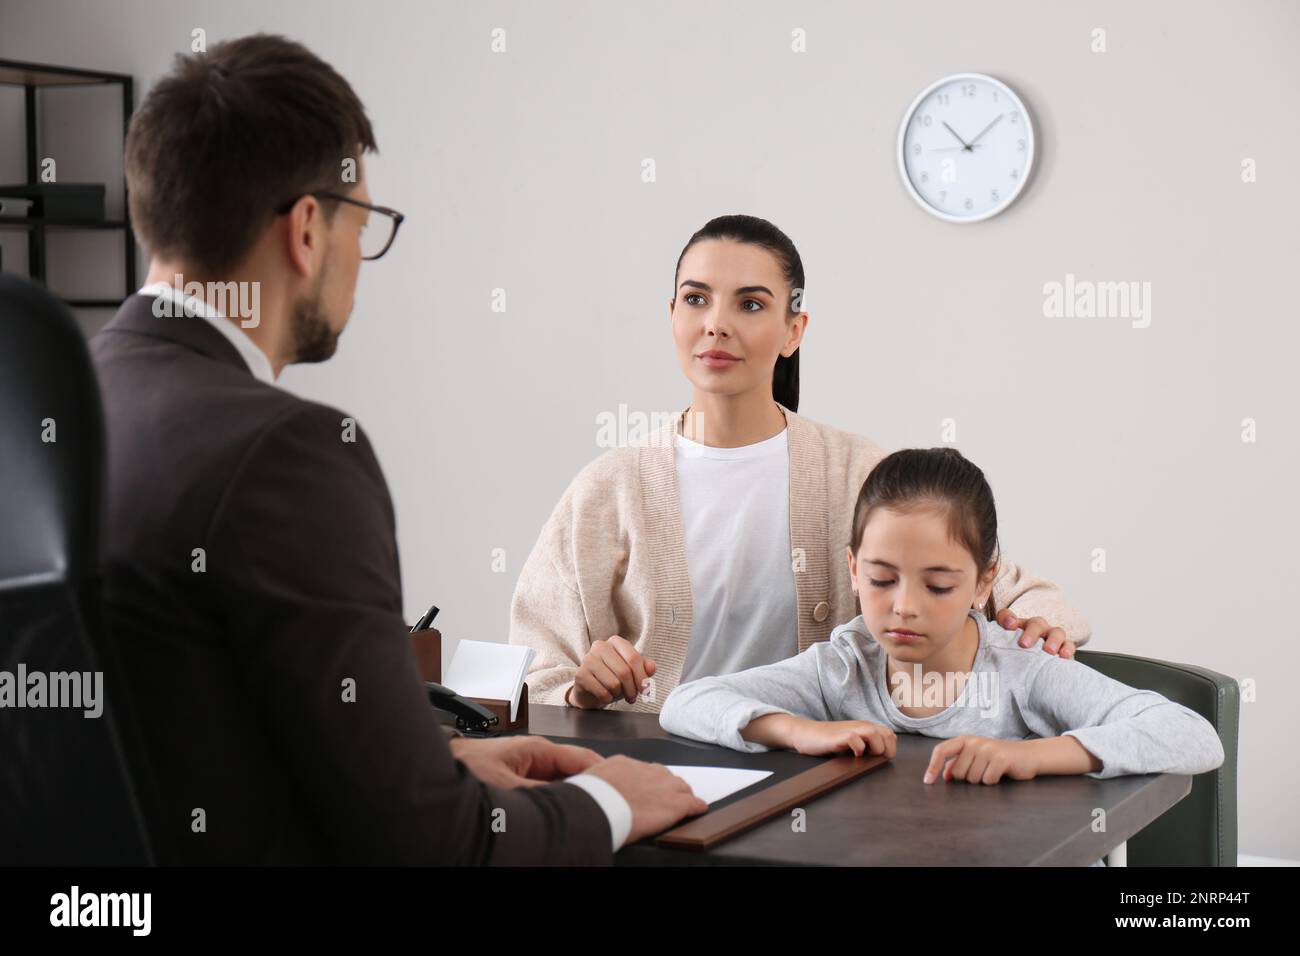 Mother and daughter having meeting with principal at school Stock Photo